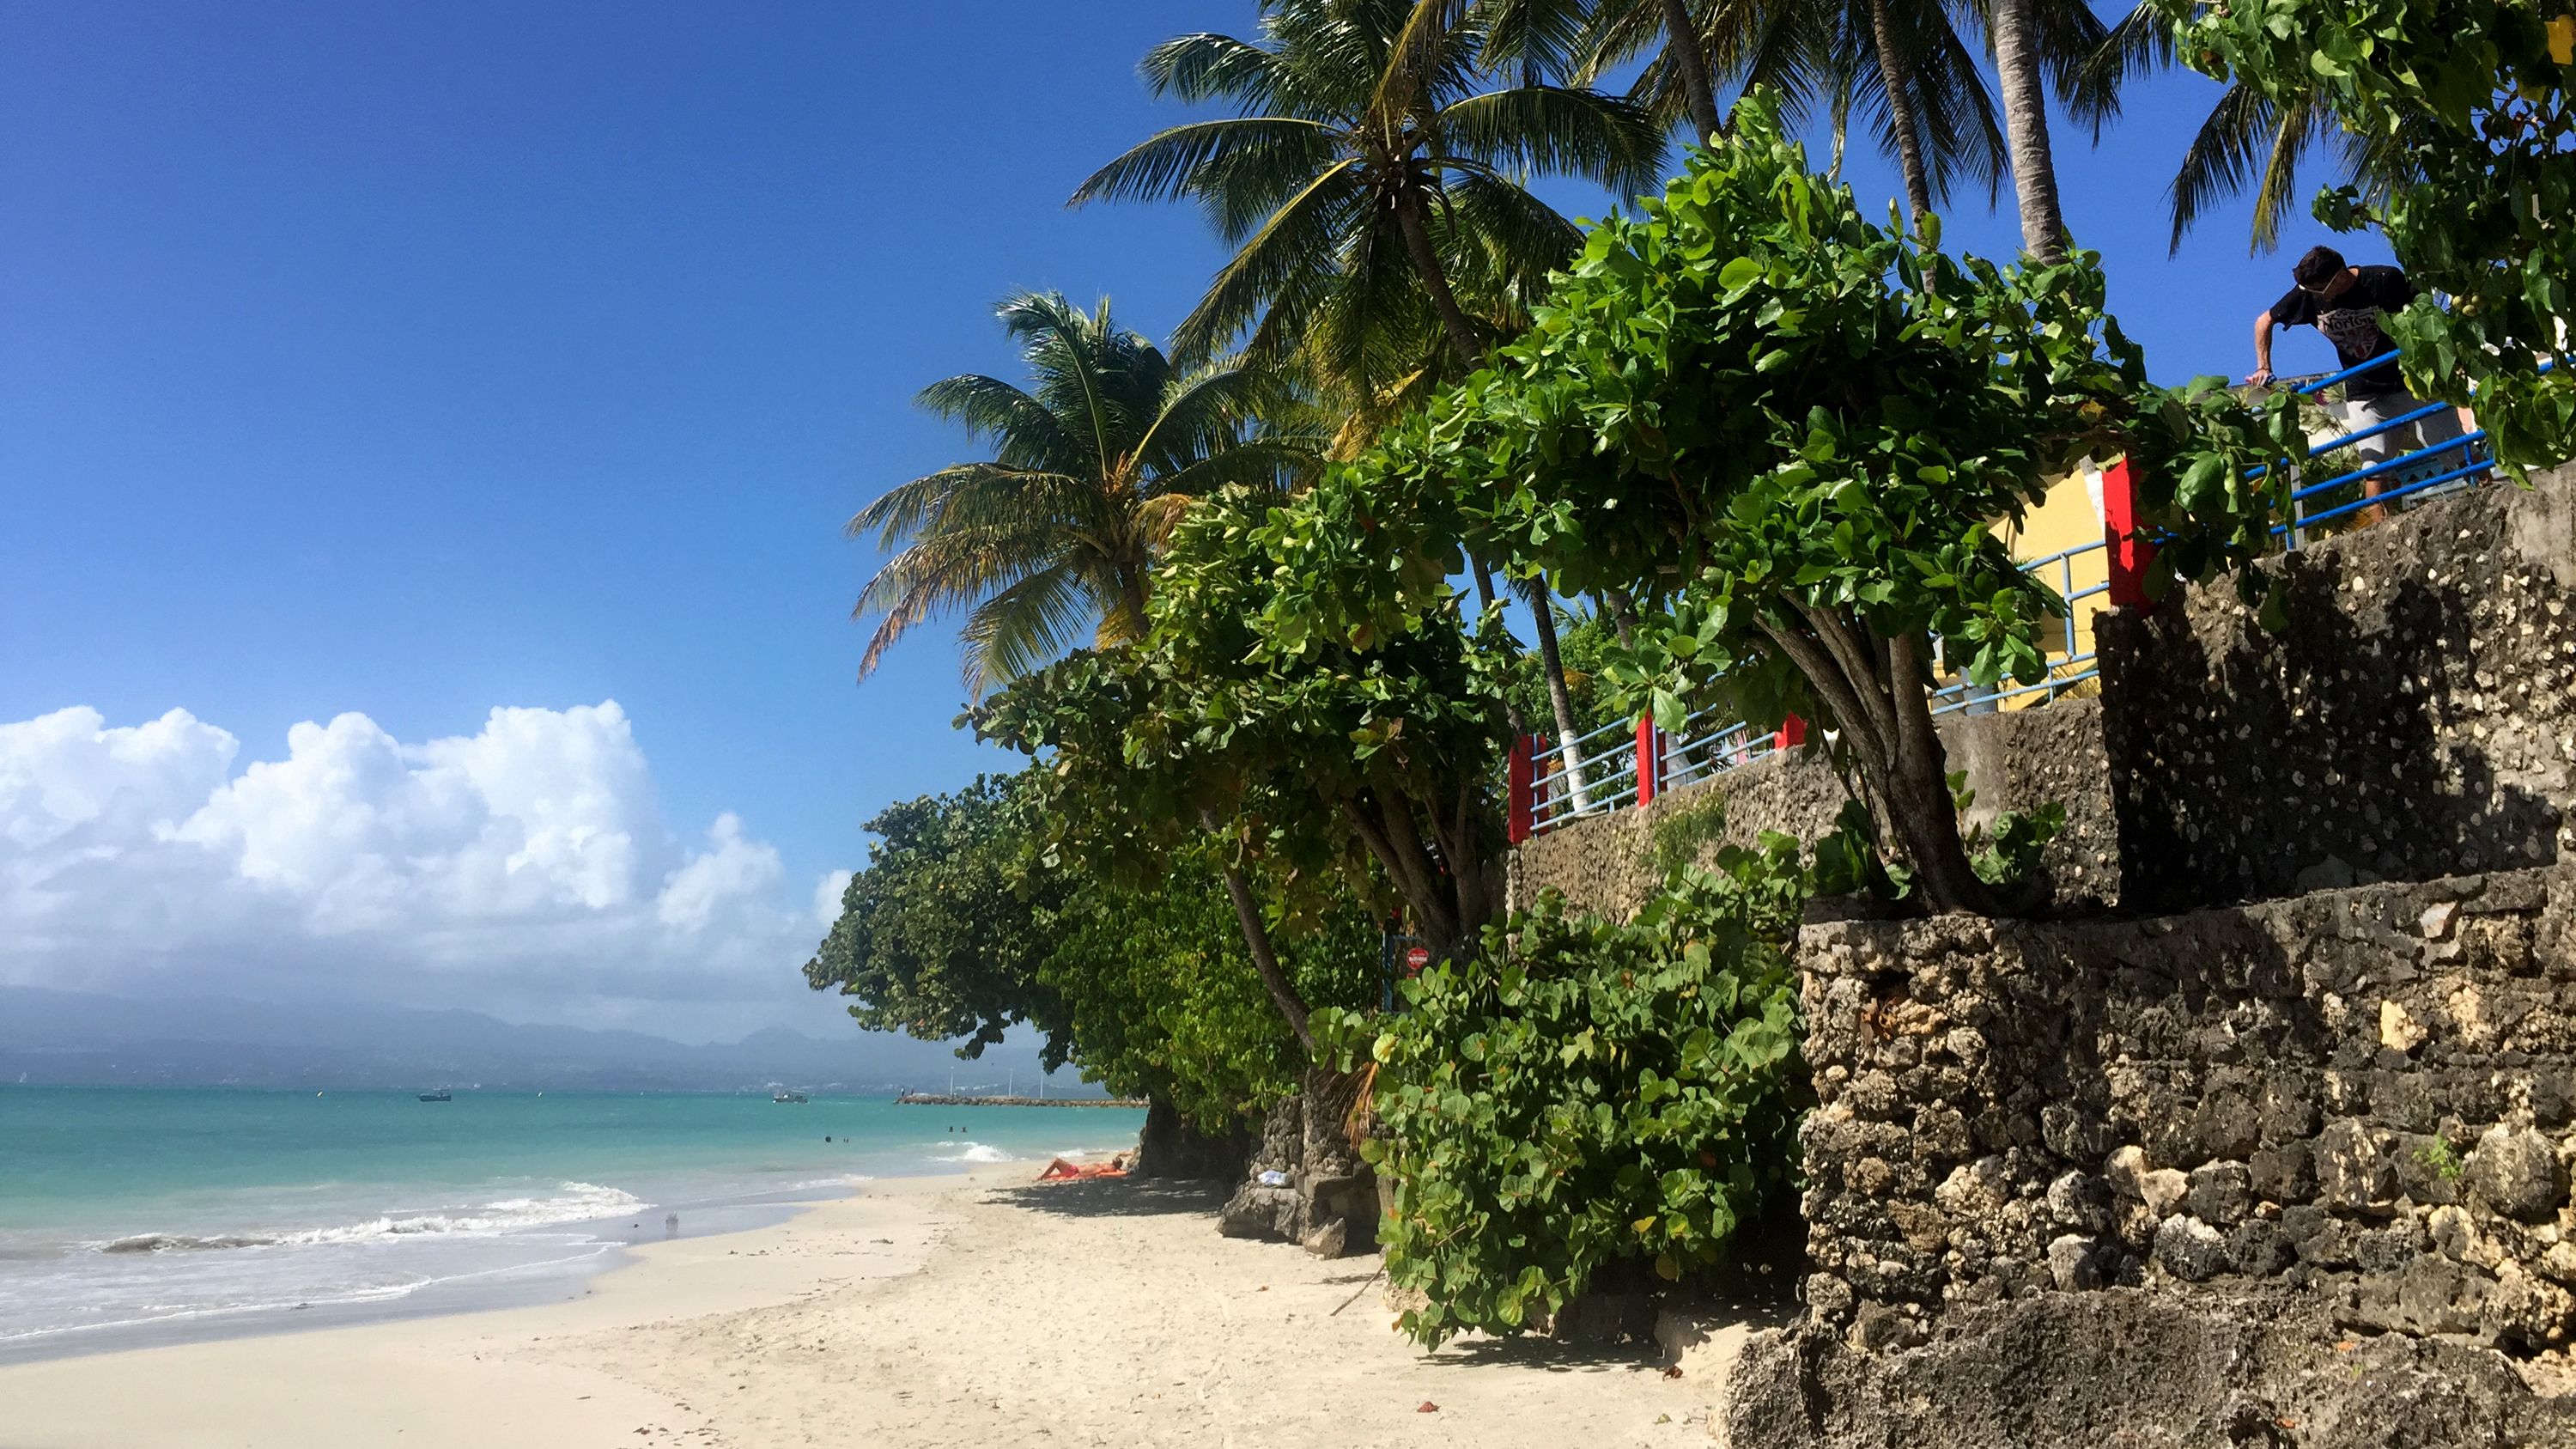 The Most beautiful beaches in Guadeloupe Islands